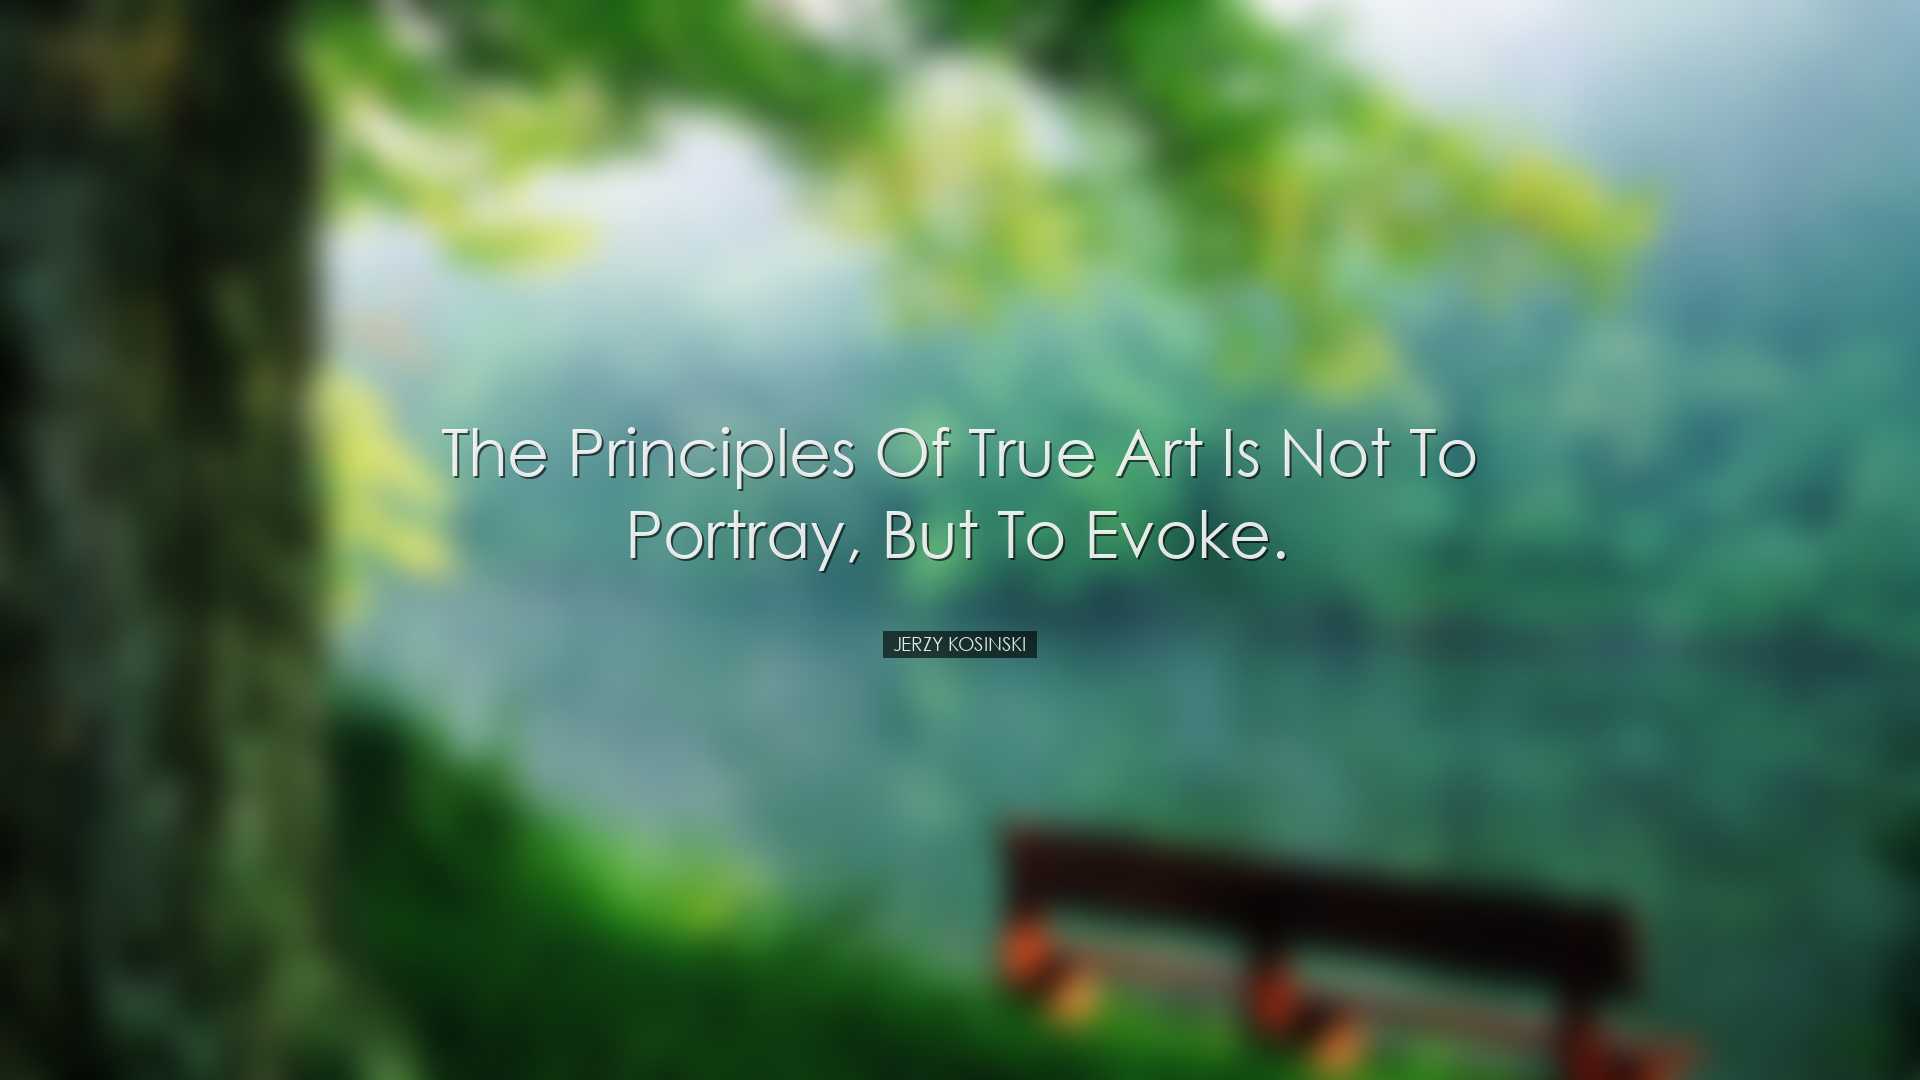 The principles of true art is not to portray, but to evoke. - Jerz